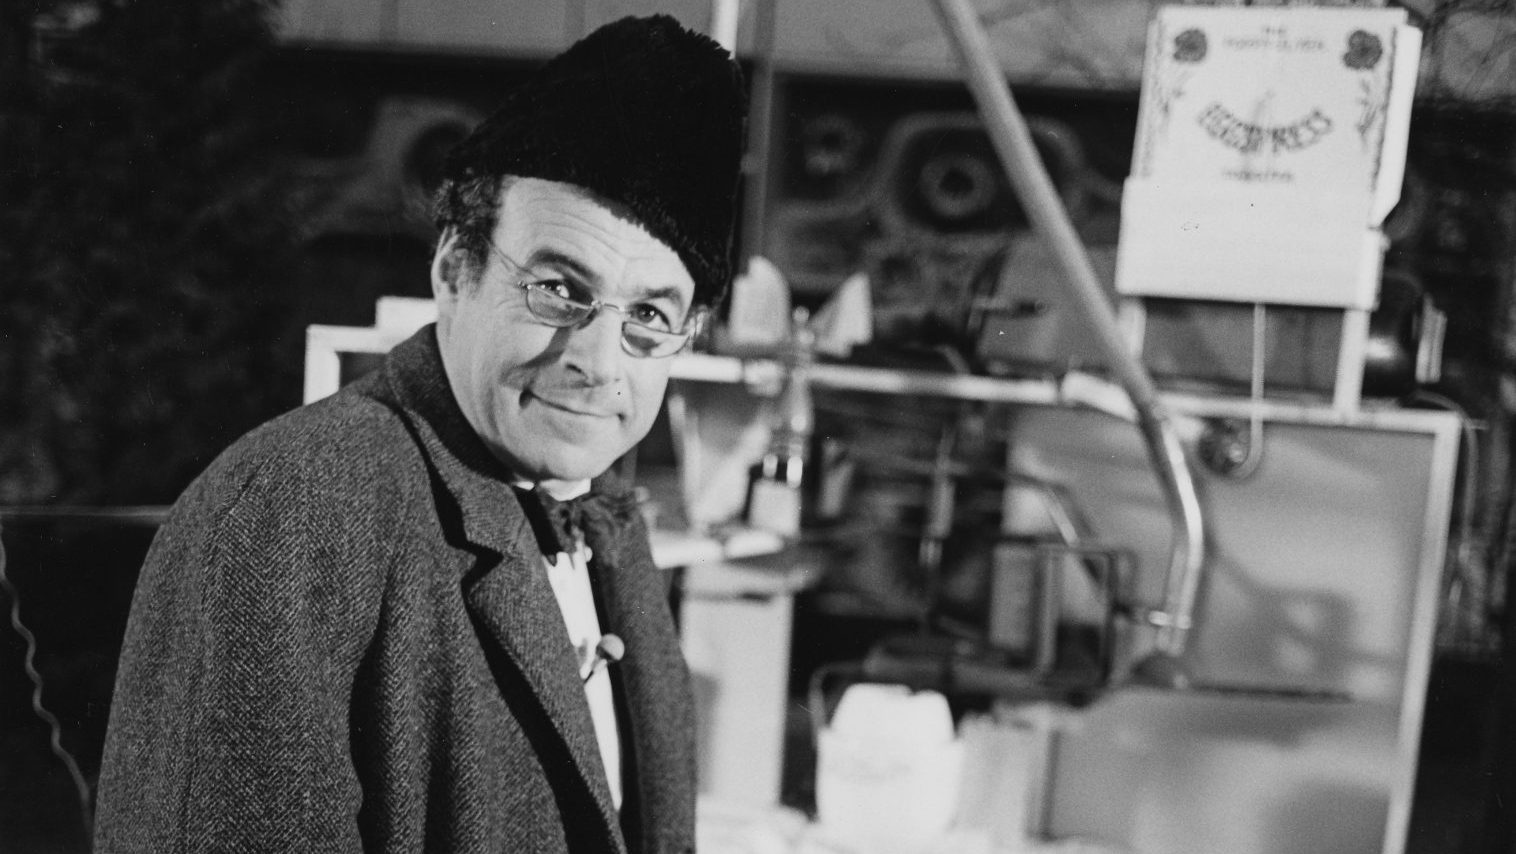 Professor Heinz Wolff on the set of The Great Egg Race February 1984. Photo: Radio Times/ Getty Images.